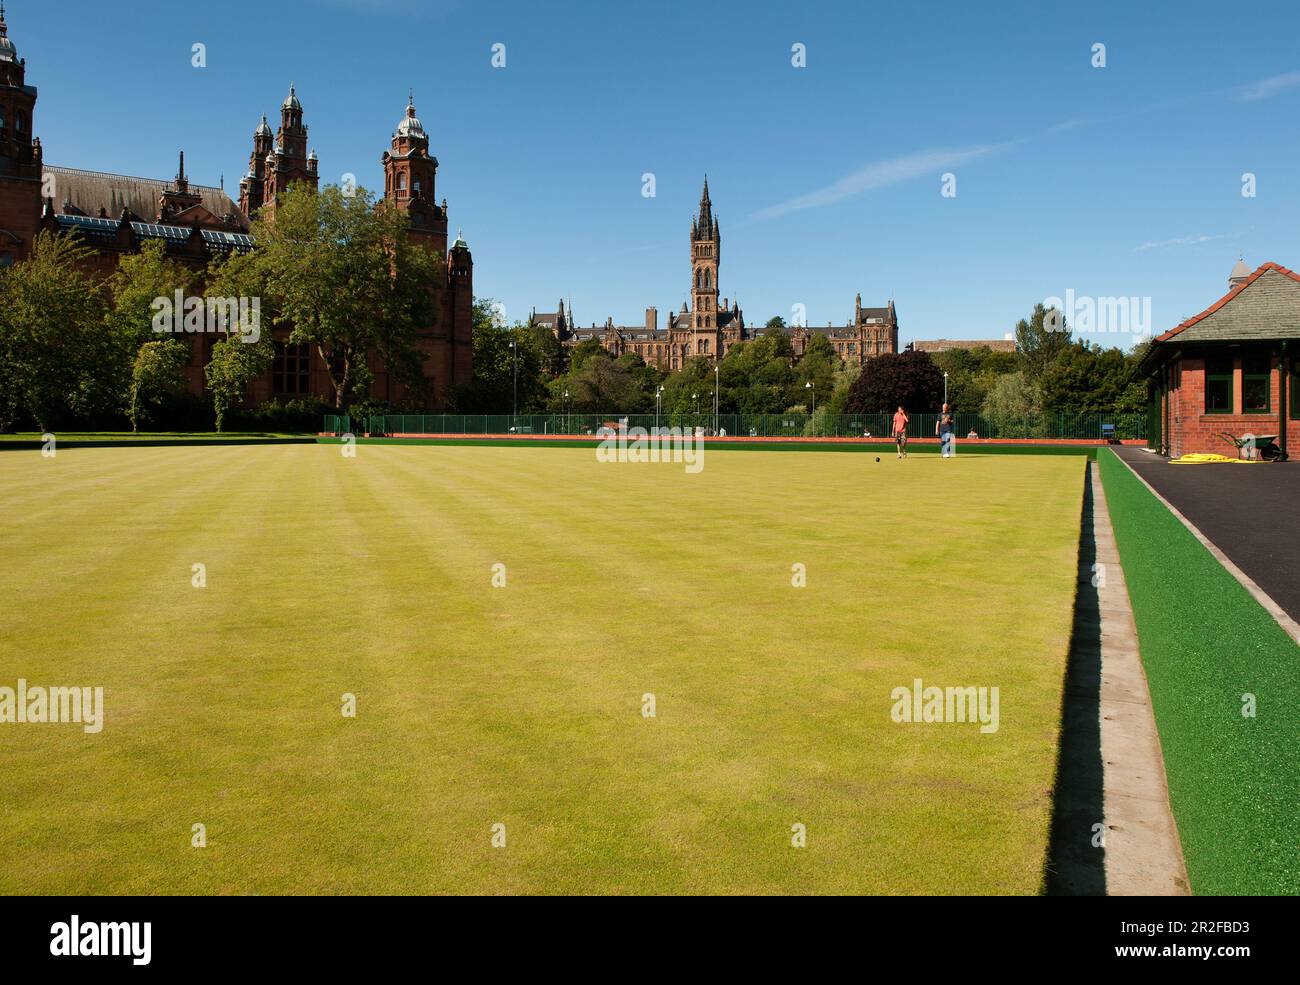 Bowls in play at the Kelvingrove lawn bowling green in front of the Kelvingrove Art Gallery and Museum and the University of Glasgow in Glasgow, Scotl Stock Photo